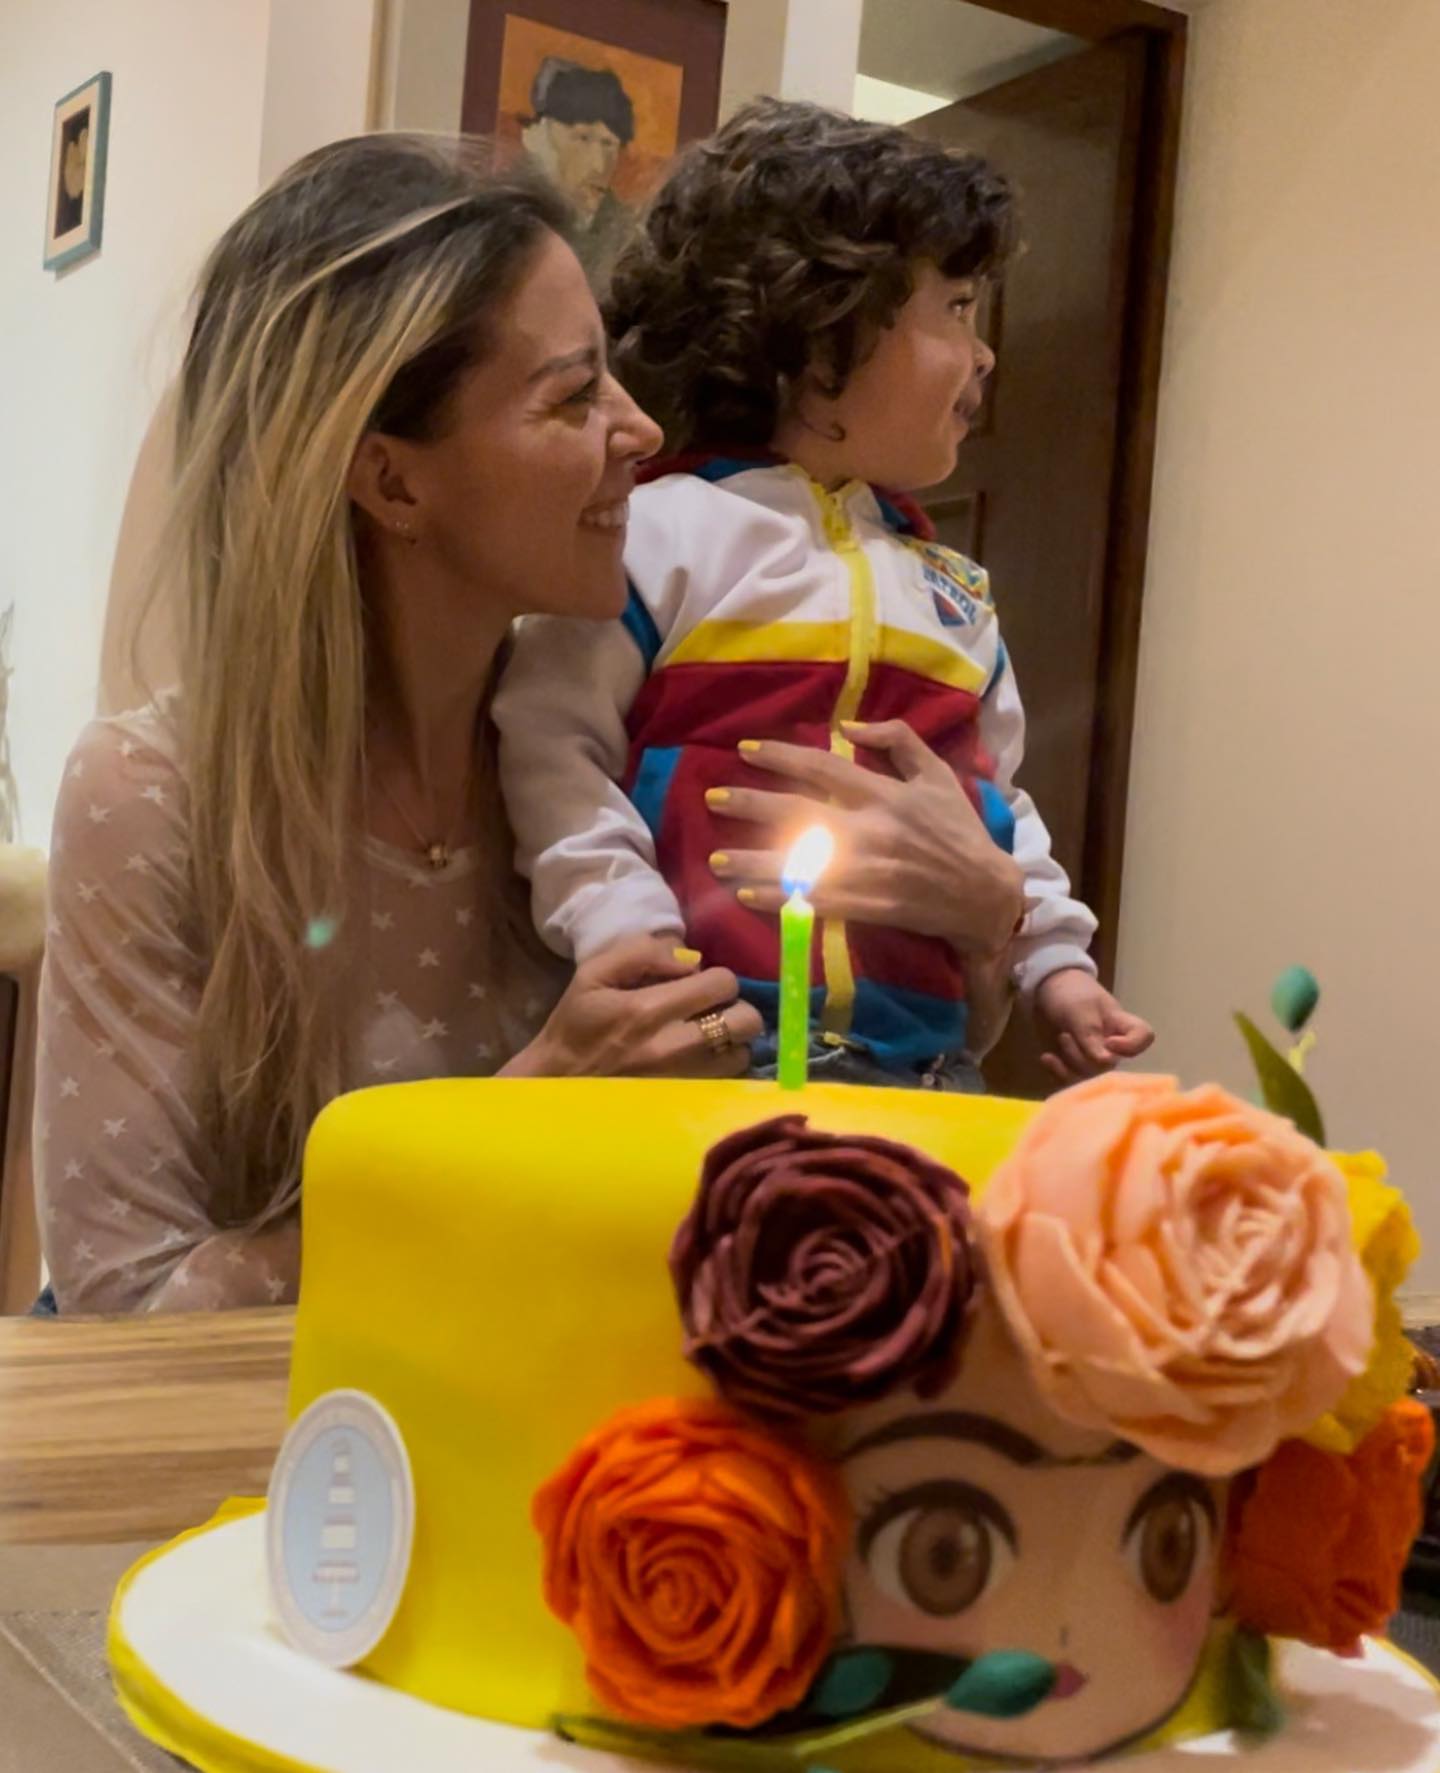 https://f.radikal.host/2023/04/01/Photo-by-Fernanda-Castillo-on-March-27-2023.-May-be-an-image-of-2-people-cake-and-indoor..jpg